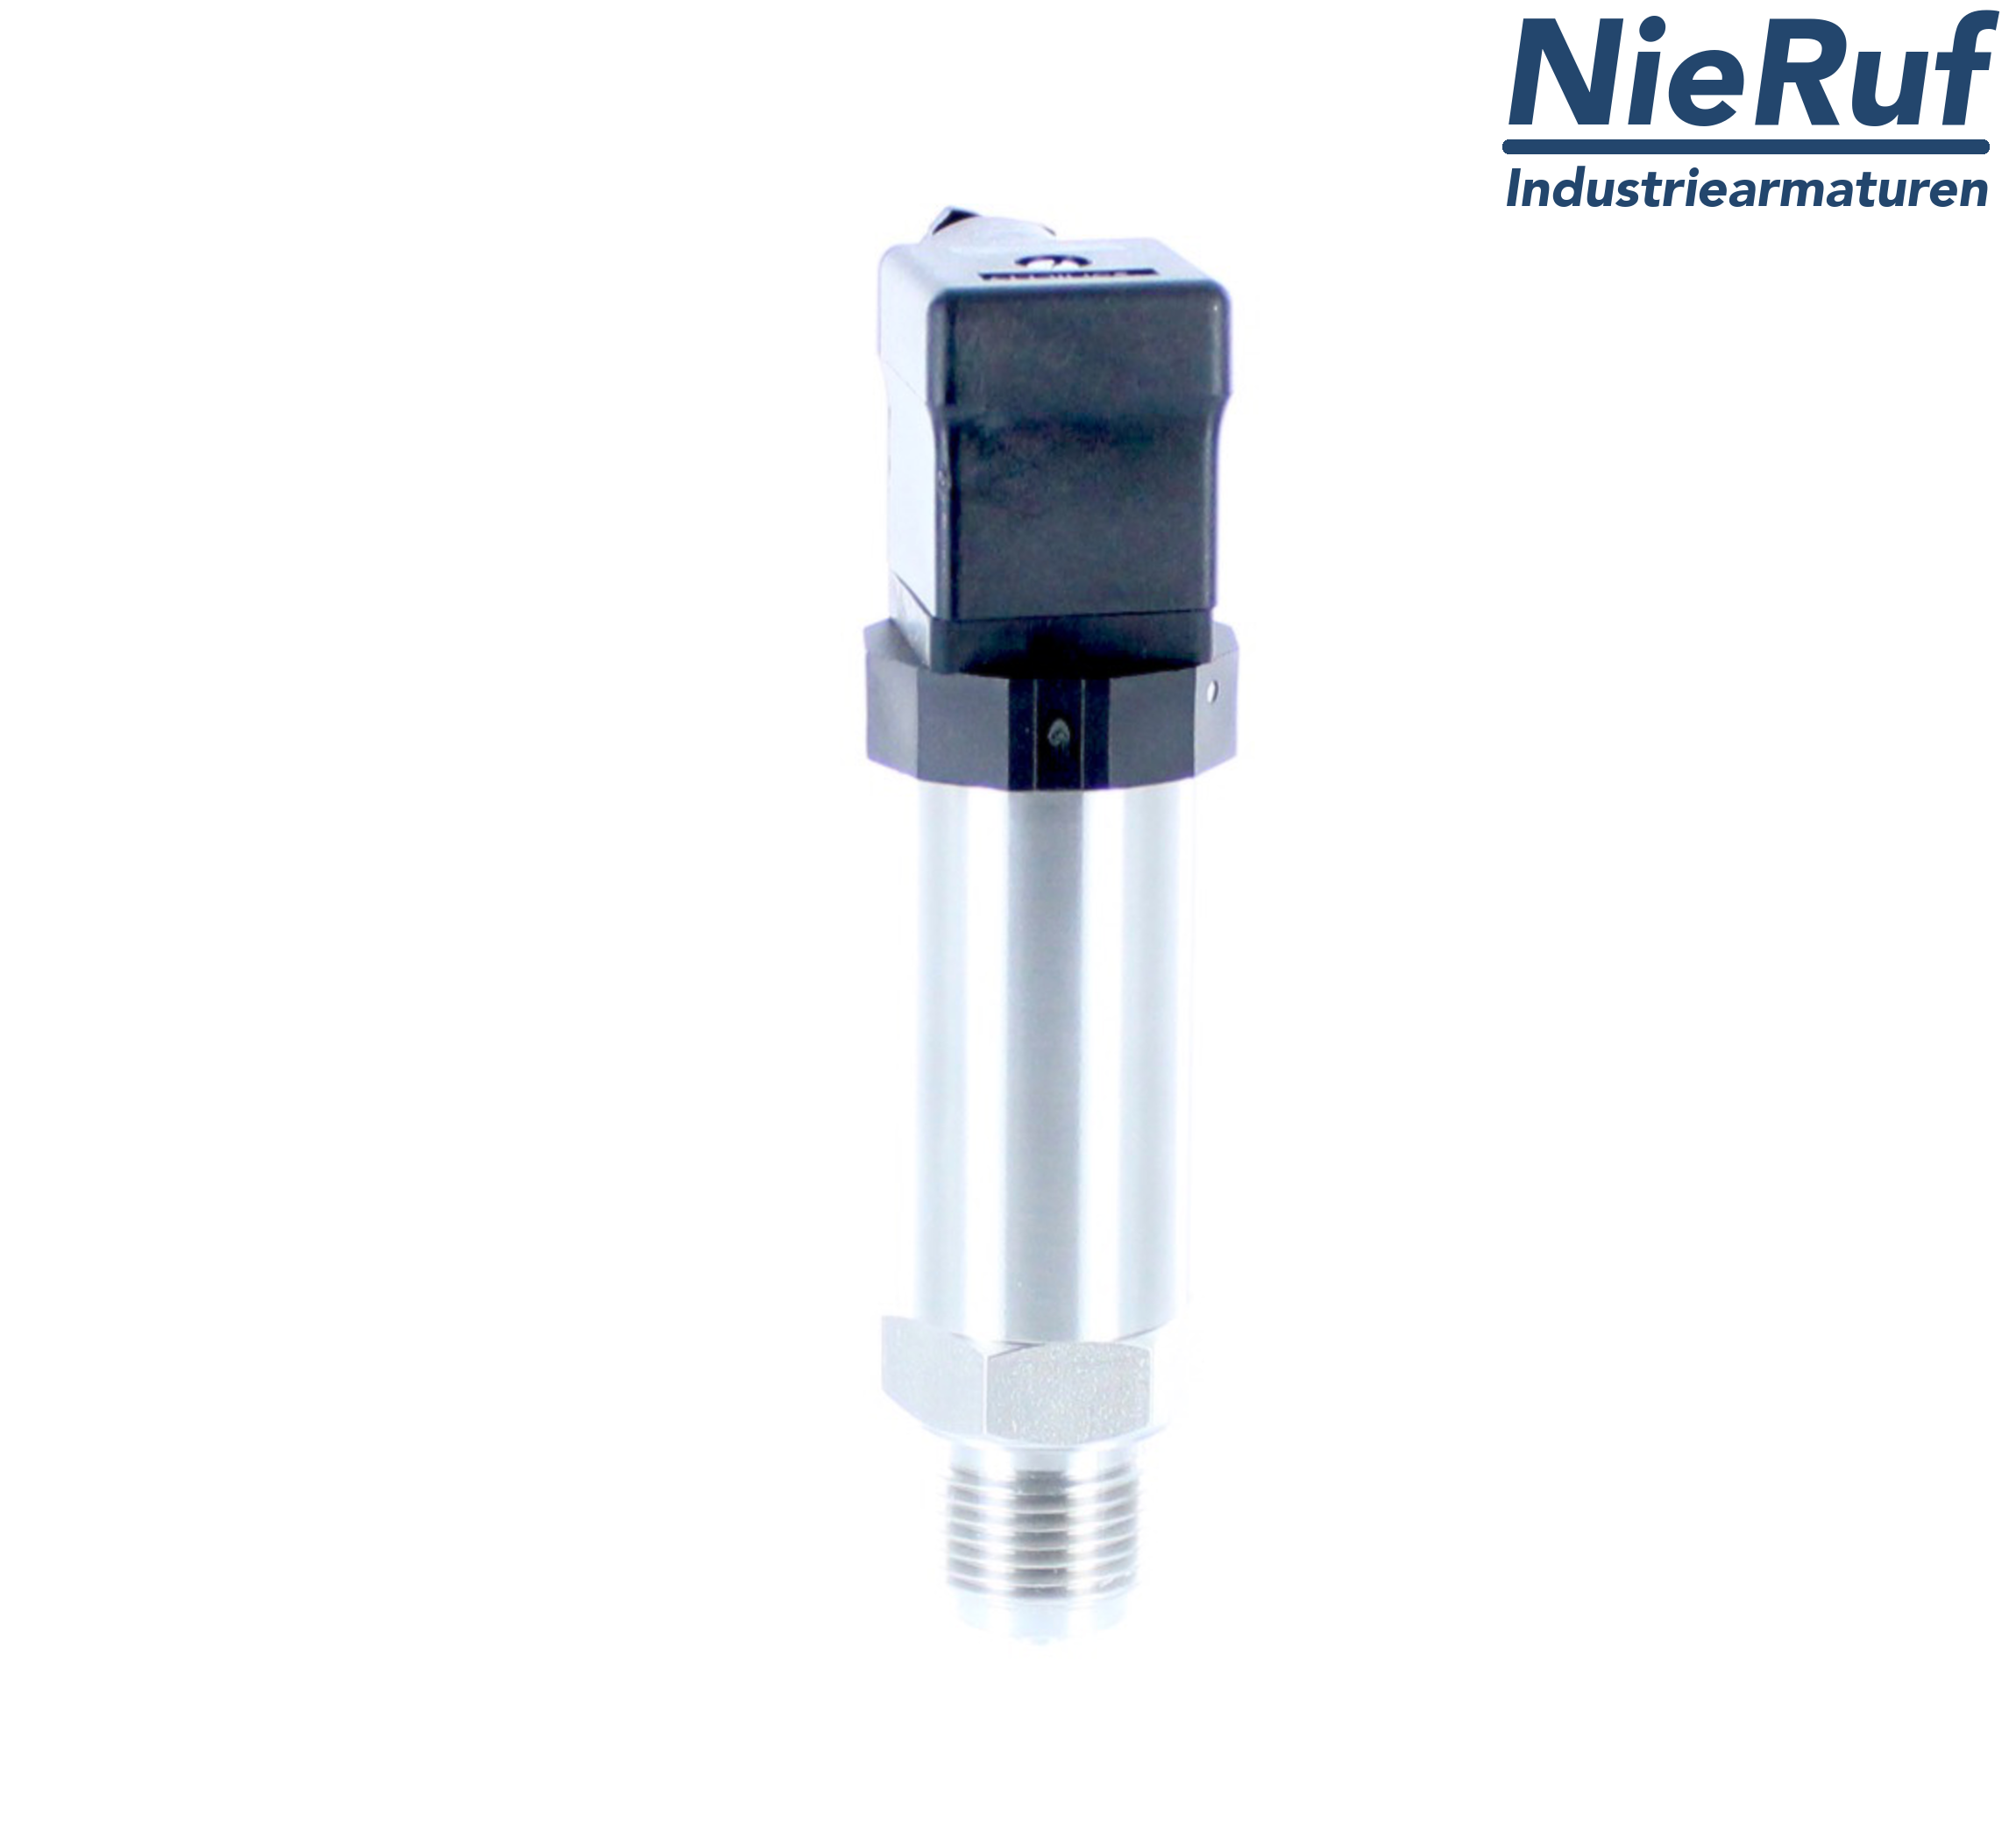 pressure sensor G 1/4" B DS01 stainless steel 2-wire: 4-20mA FPM 0,0 - 600,0 bar